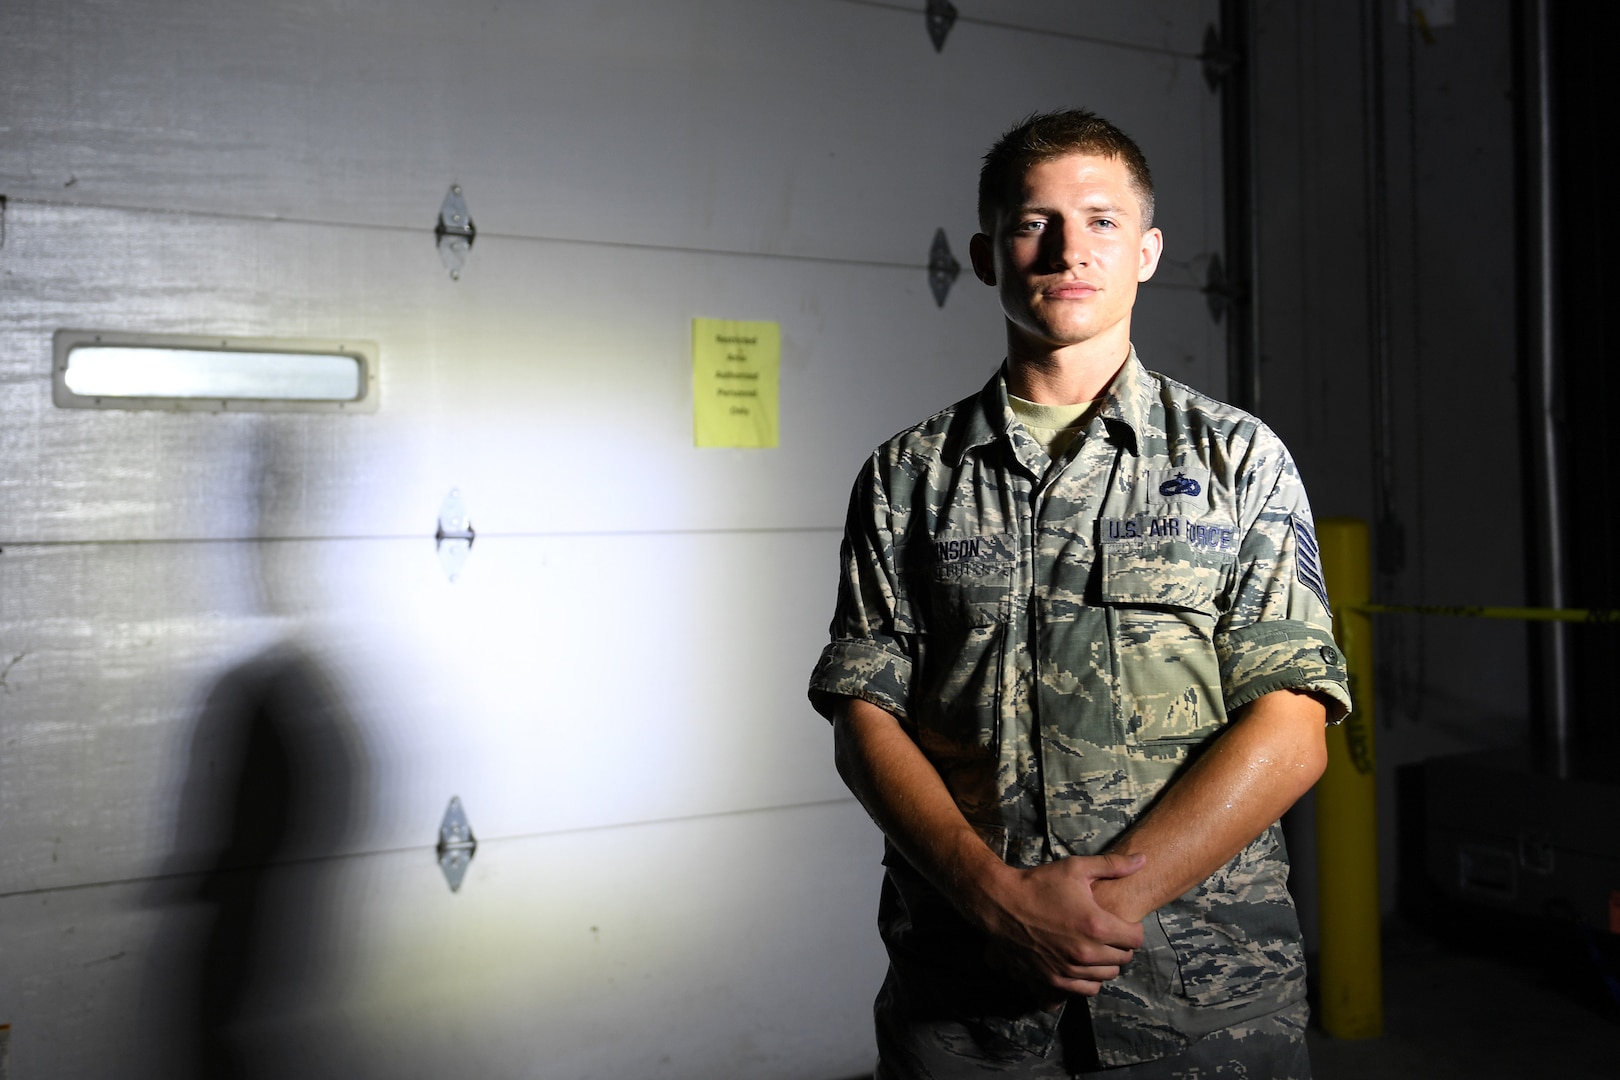 U.S. Air Force Tech. Sgt. William Johnson, 145th Logistical Readiness Squadron, operates and maintains warehouse operation in Kinston, NC. during Hurricane Florence, Sept. 14, 2018. Tech. Sgt. Johnson leads an eleven-man team to stack and fill pallets full of supplies including water and food inside a Kinston warehouse in preparation for Hurricane Florence.